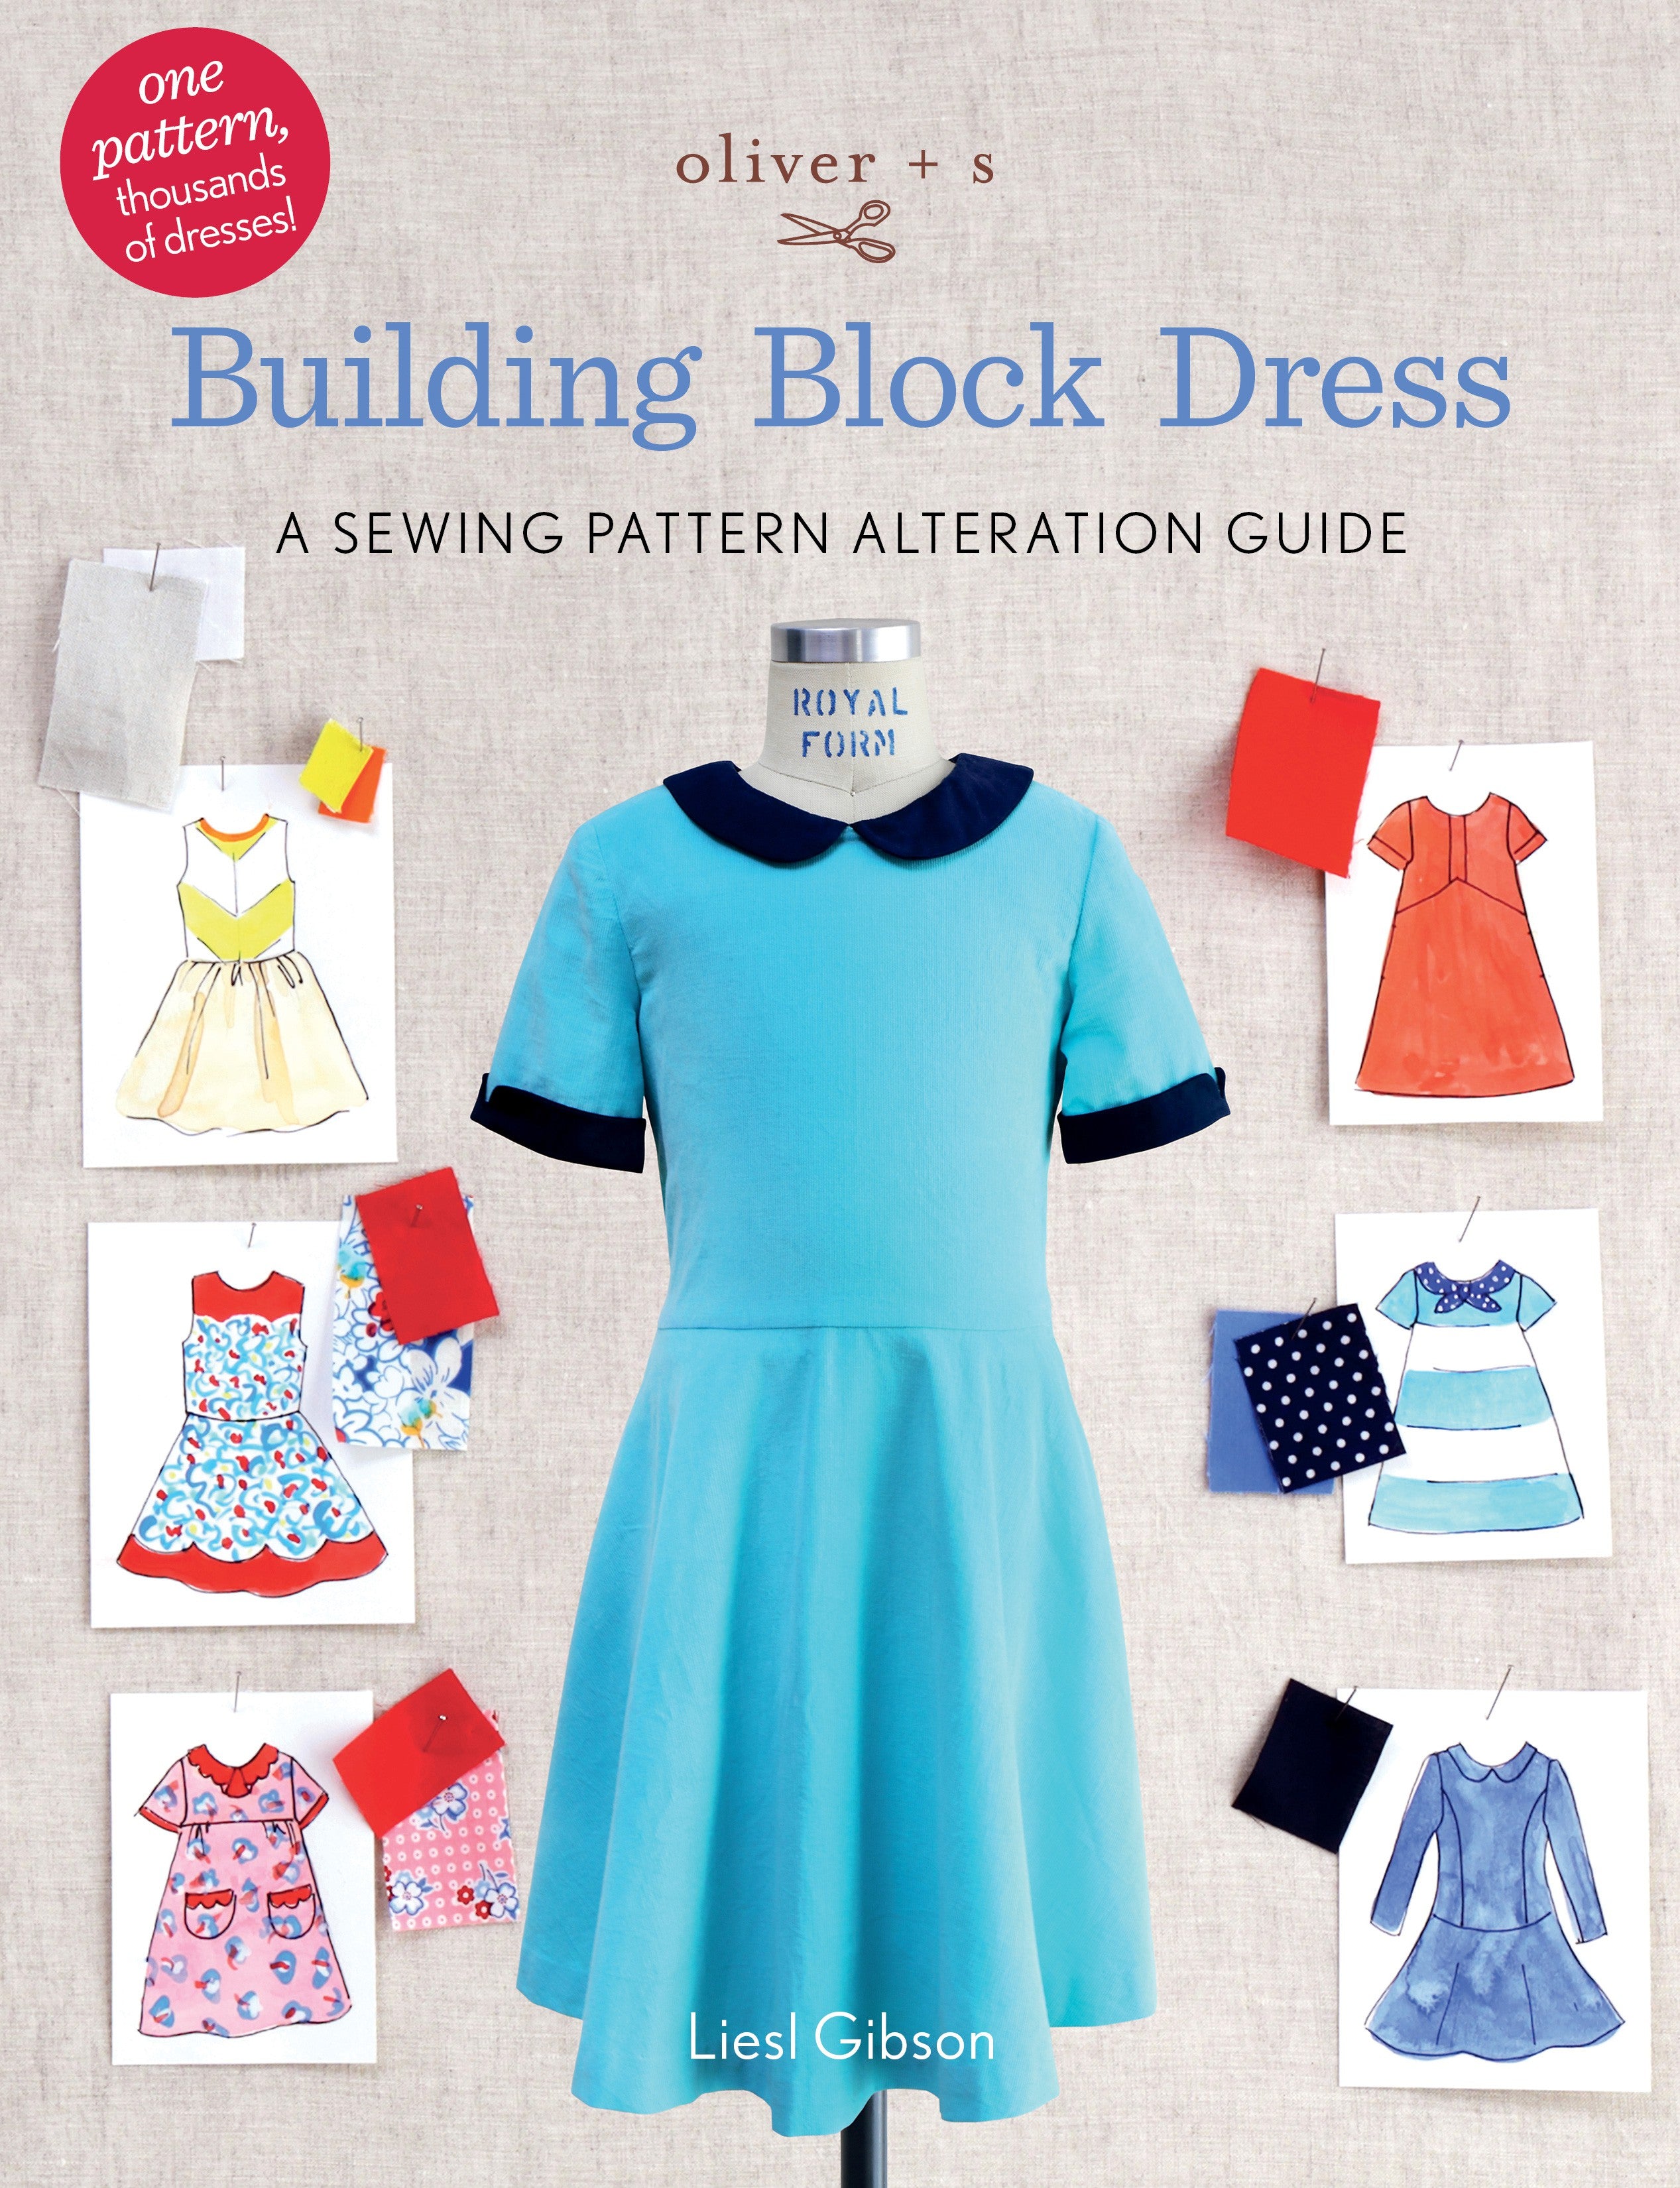 Oliver + S Building Block Dress Sewing Pattern Guide Book by Liesl Gibson for Liesl and Co